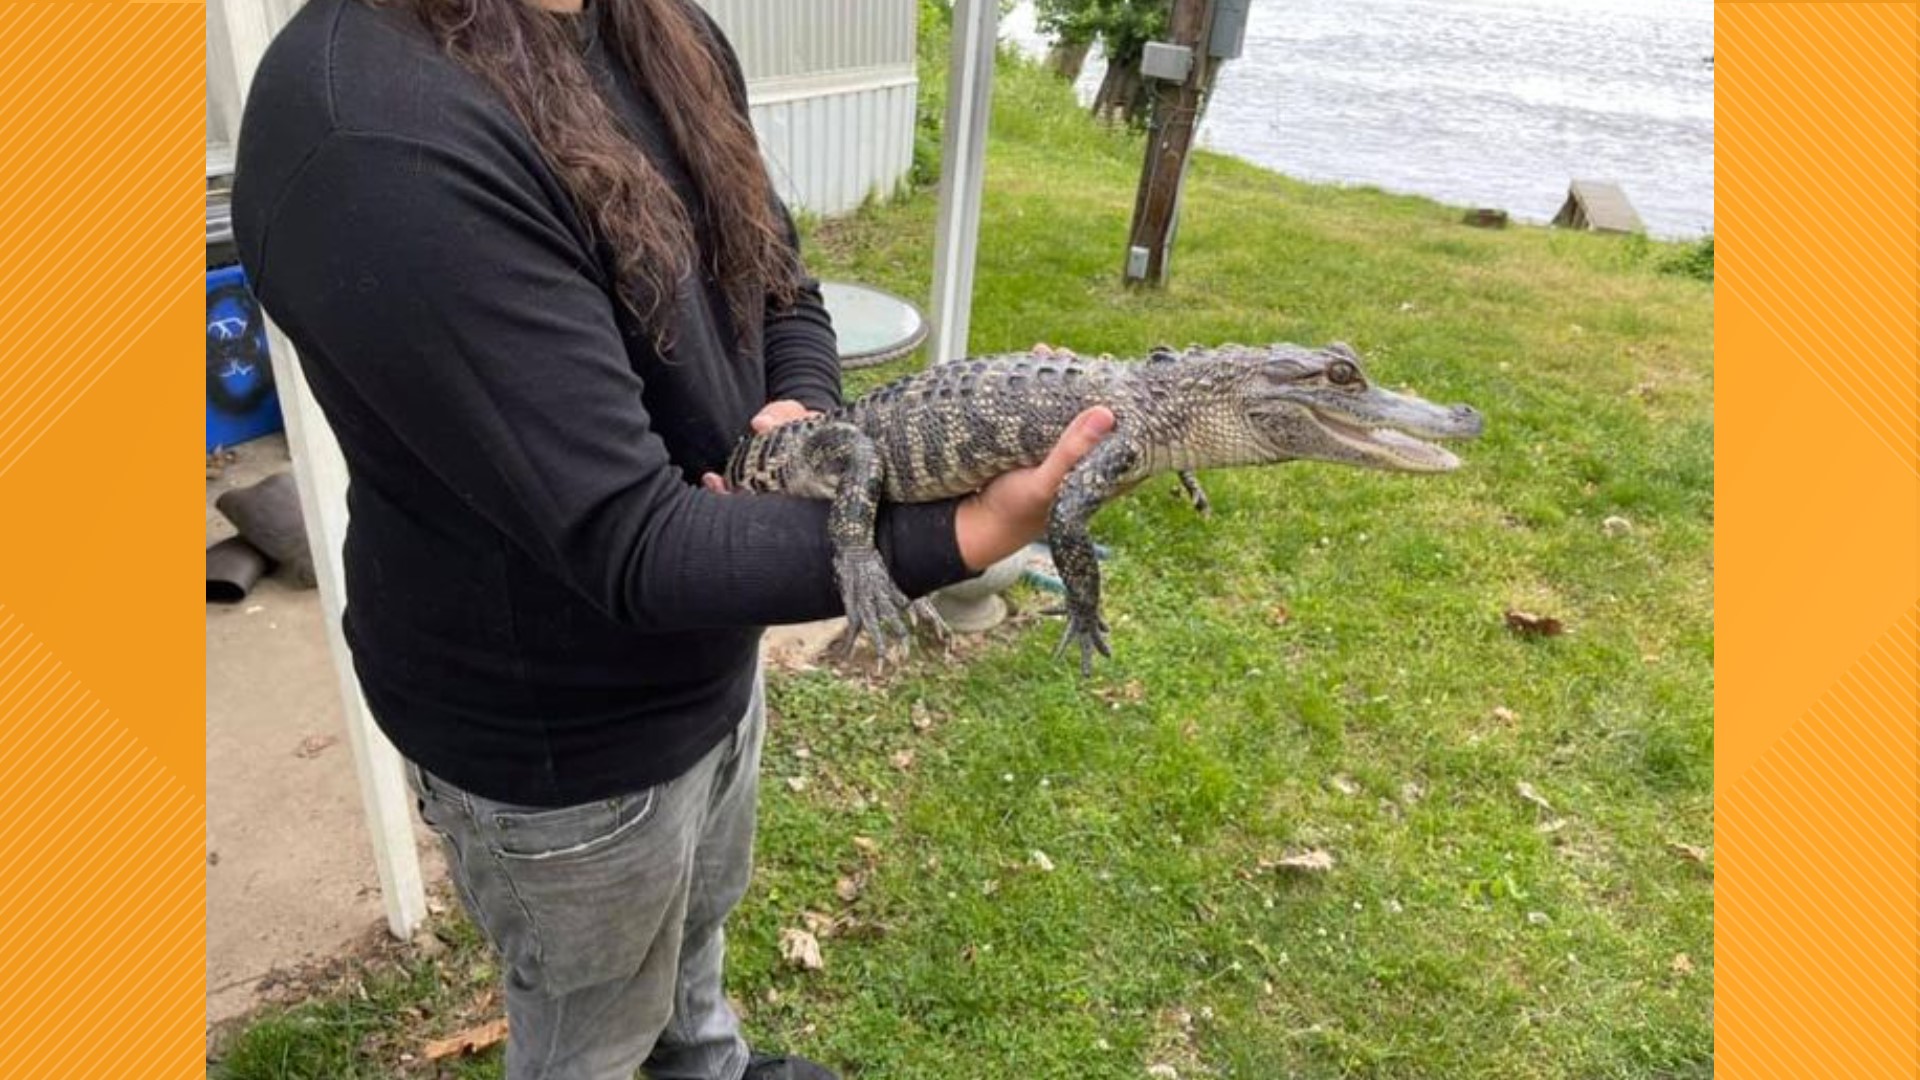 The 3-foot long gator somehow slipped out of his cage. Photos of him swimming in the Susquehanna this morning circulated on social media and drew several onlookers.